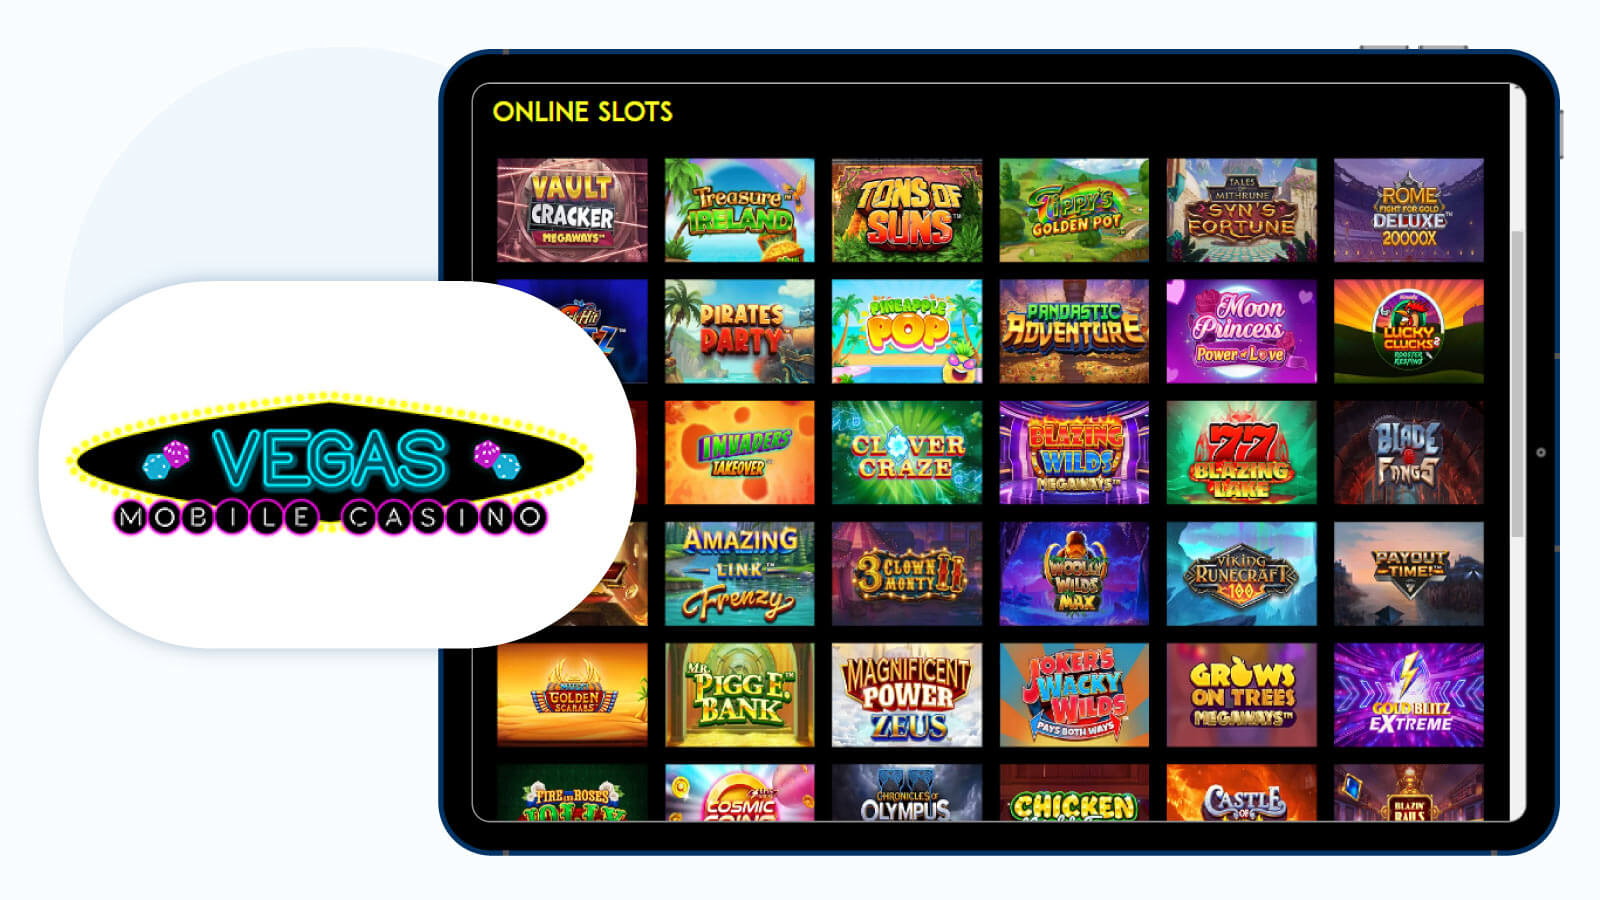 Vegas-Mobile-Casino-The-newest-online-casino-for-mobile